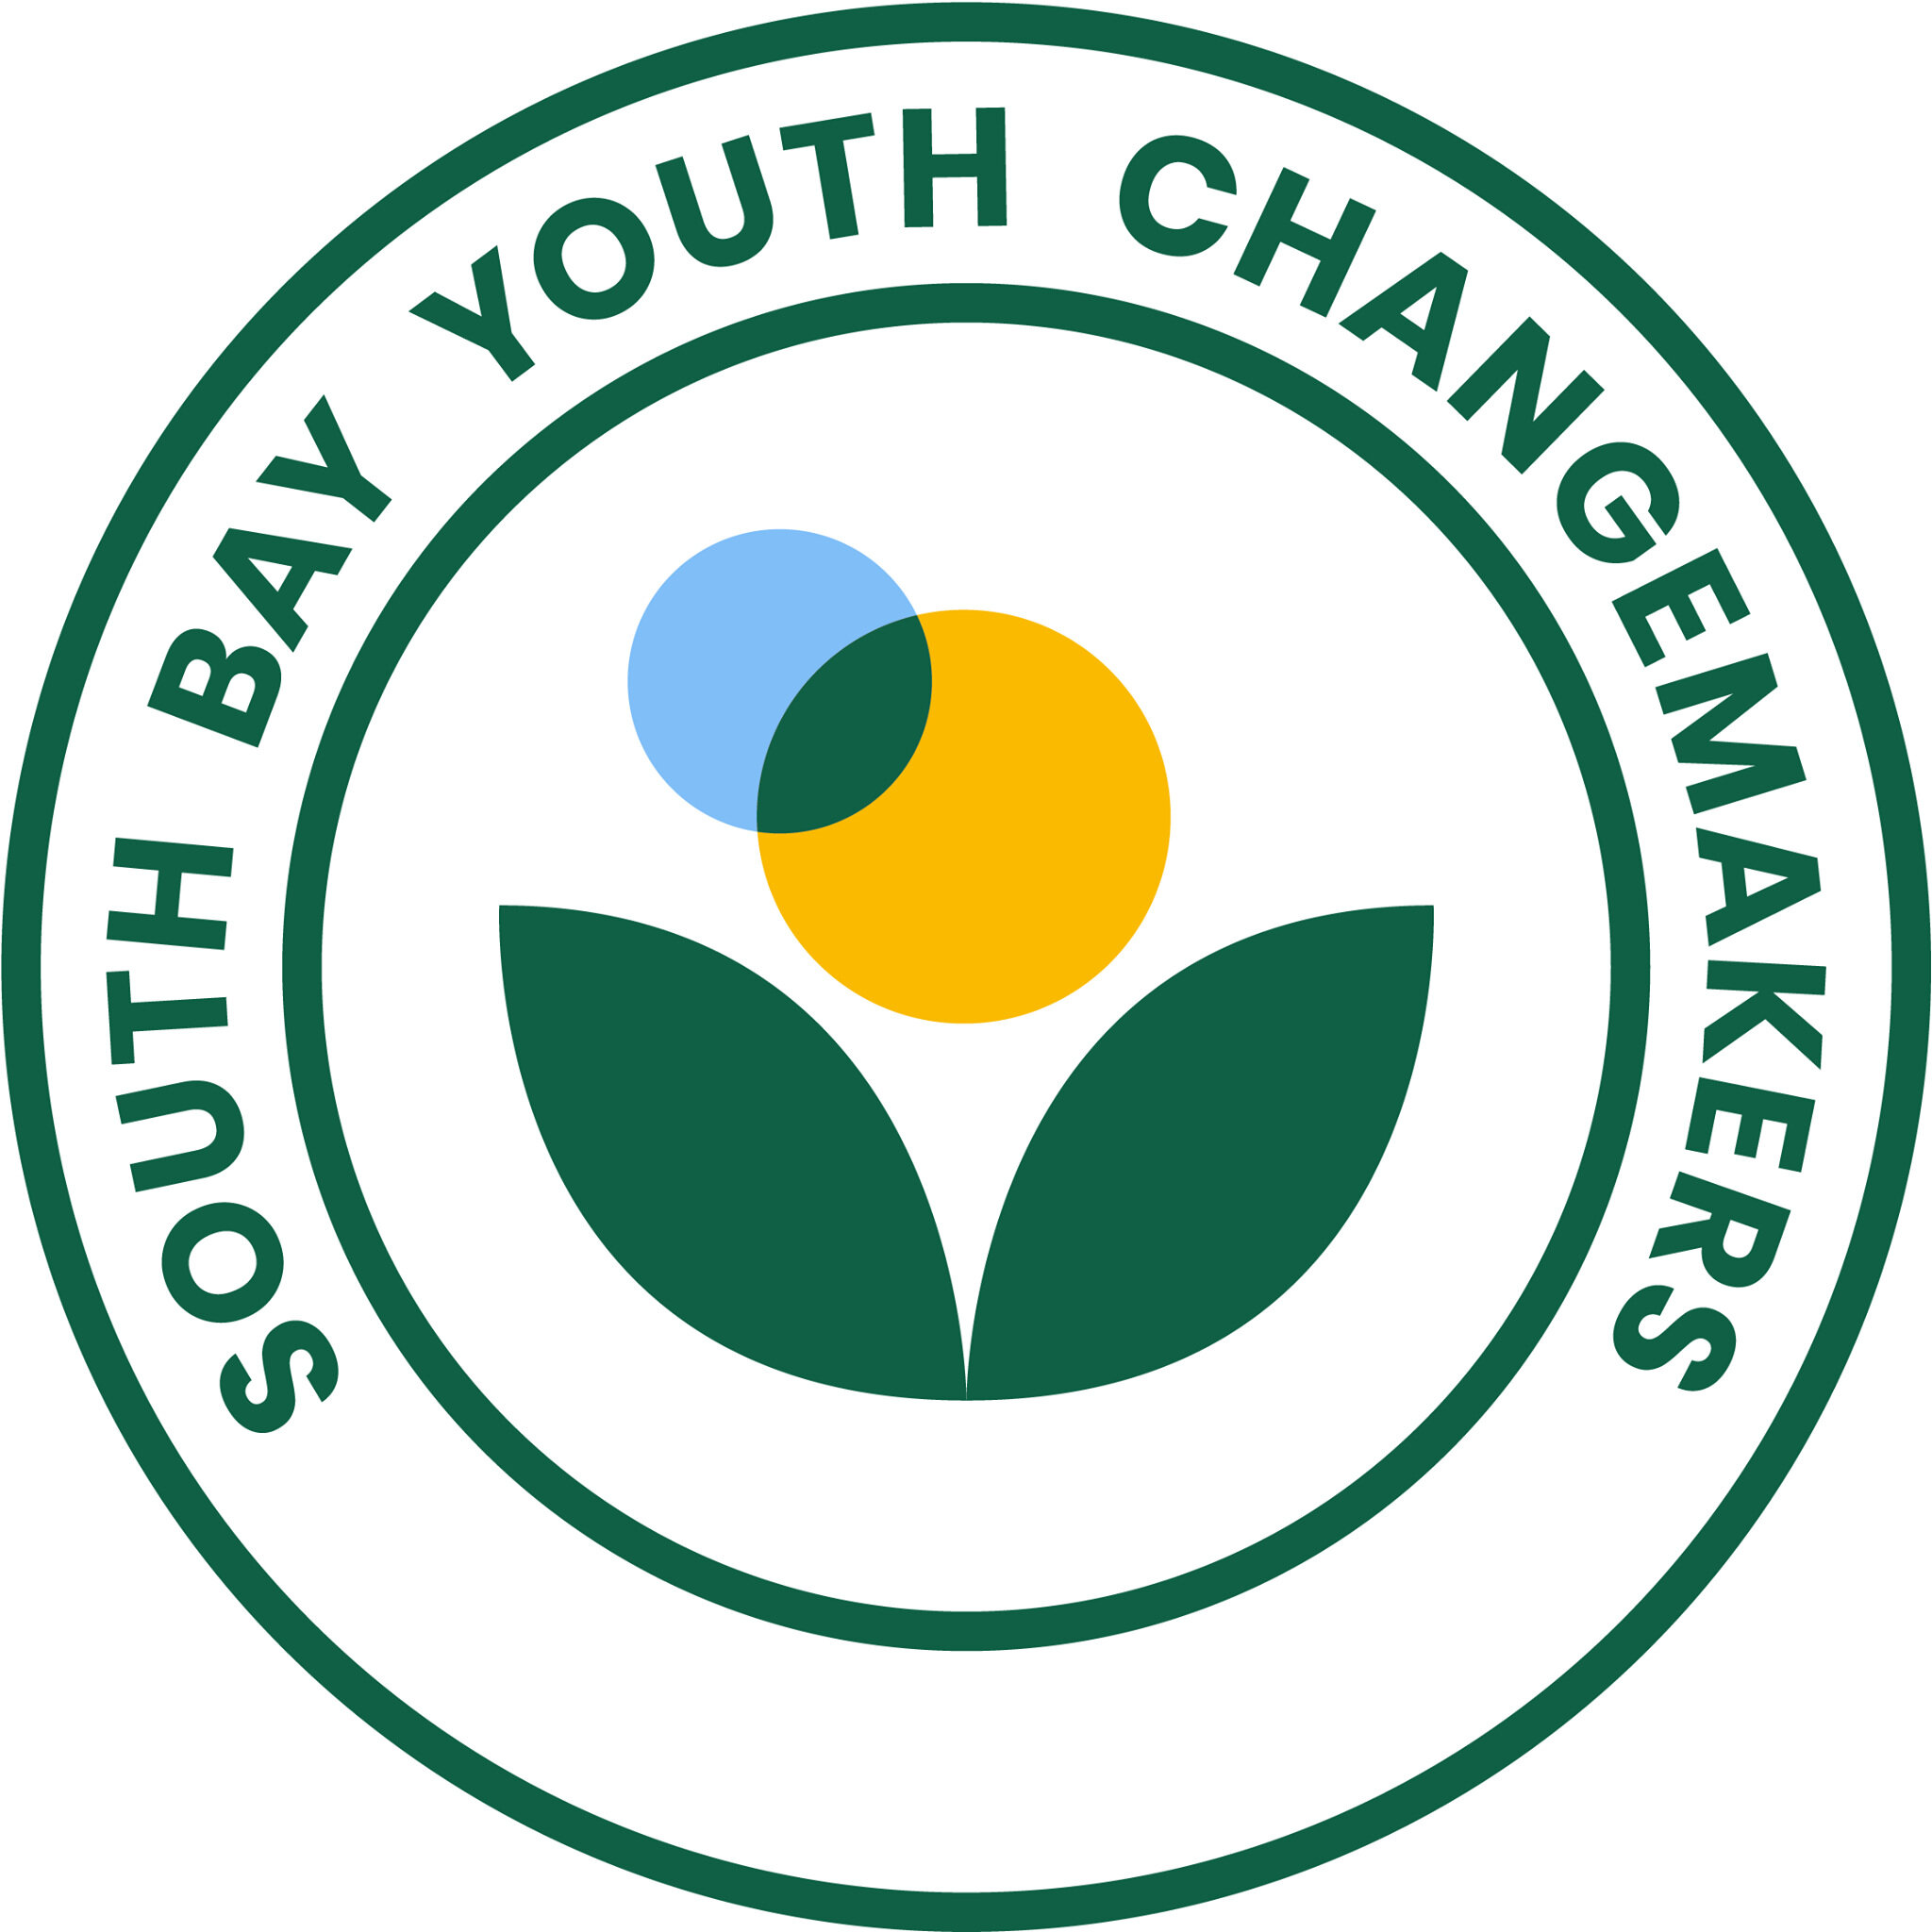 South Bay Youth Changemakers